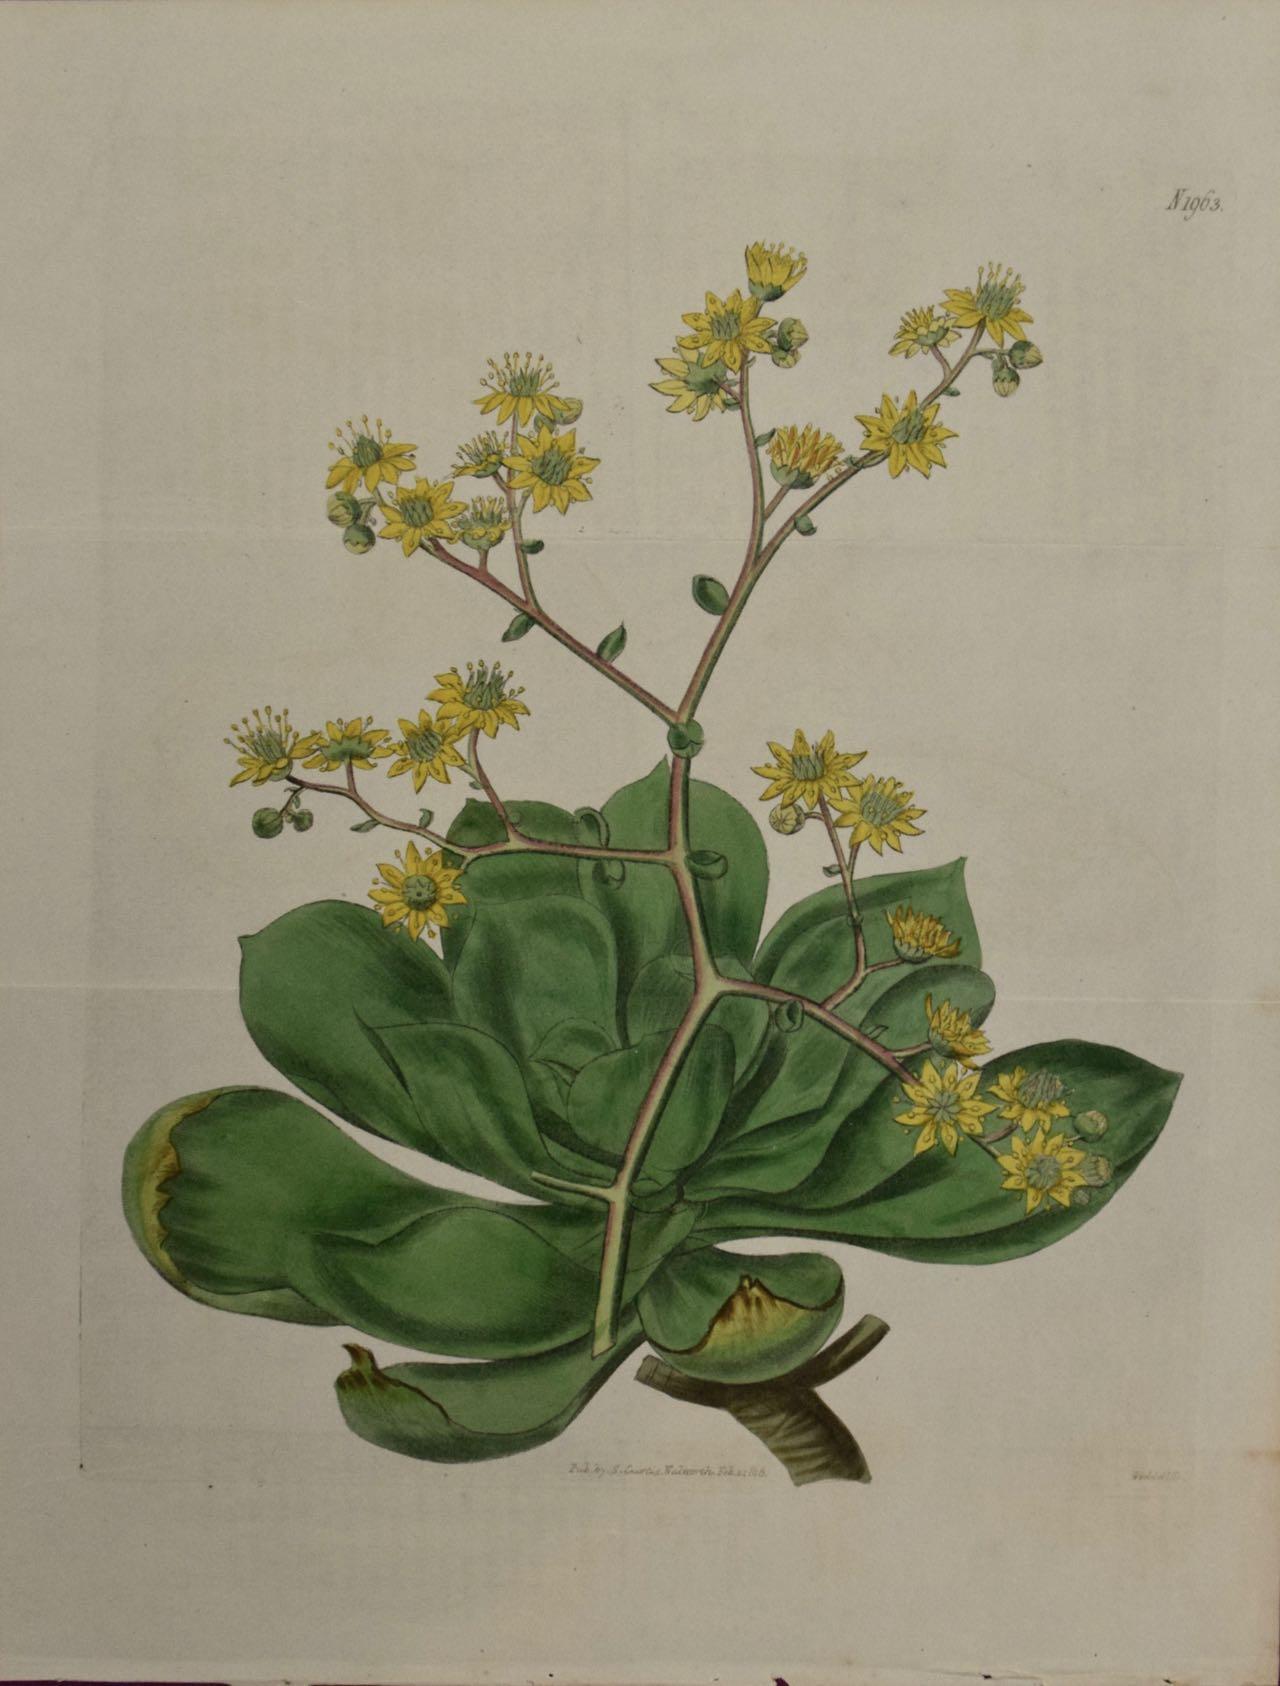 Flowering Houseleek Plant: A 19th C. Hand-colored Botanical Engraving by Curtis